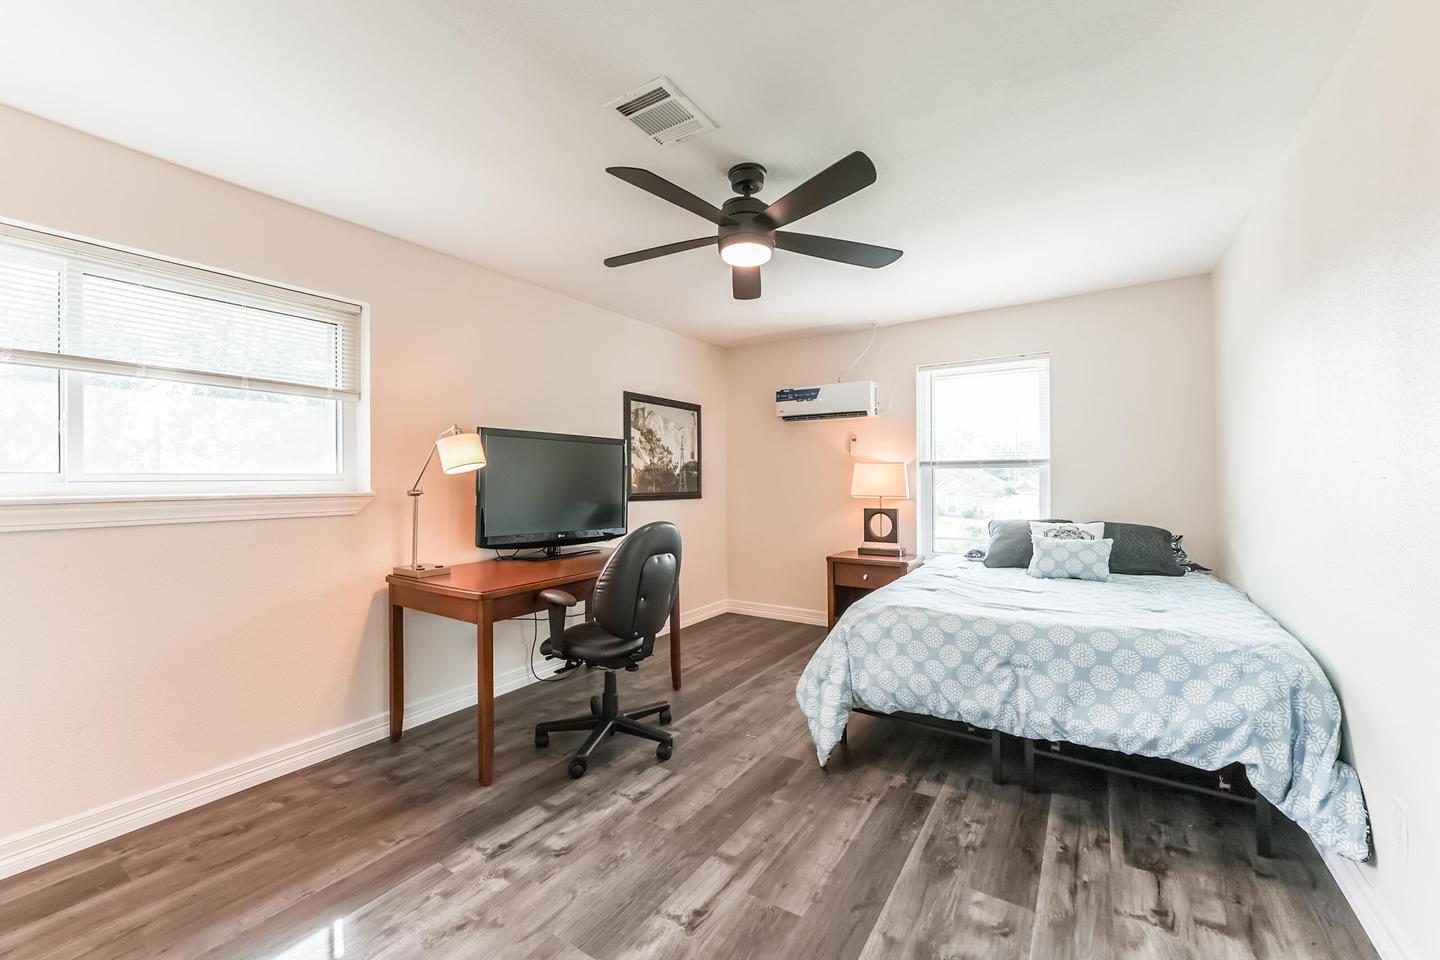 Upstairs room with minisplit AC, queen bed, hybrid mattress, night stand, full length mirror, and desk with chair and TV.